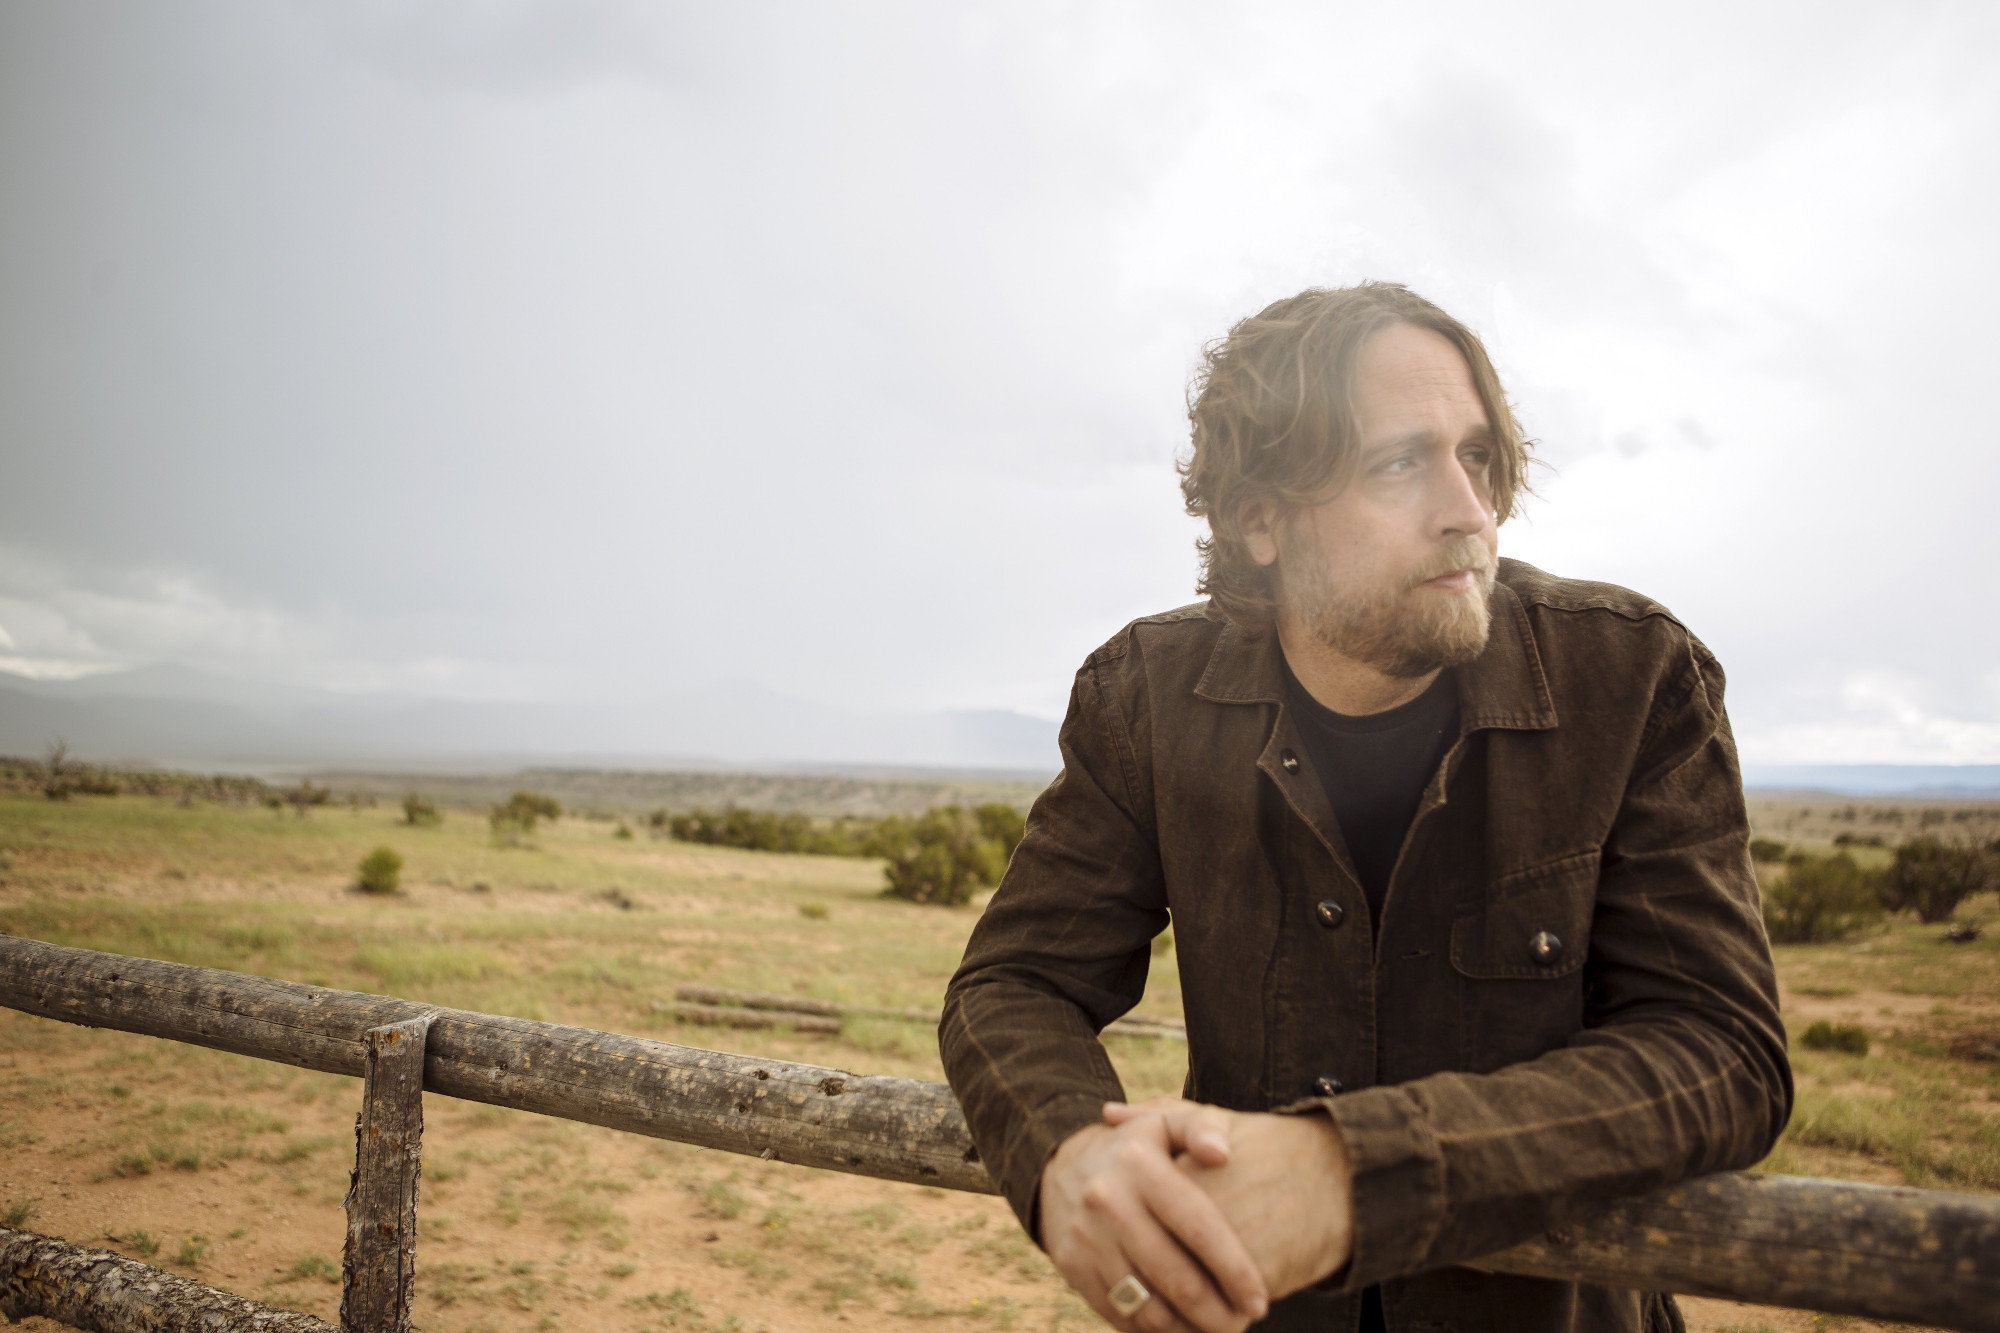 Hayes Carll, Inspired By a Picking Party, Discusses ‘Alone Together’ Album